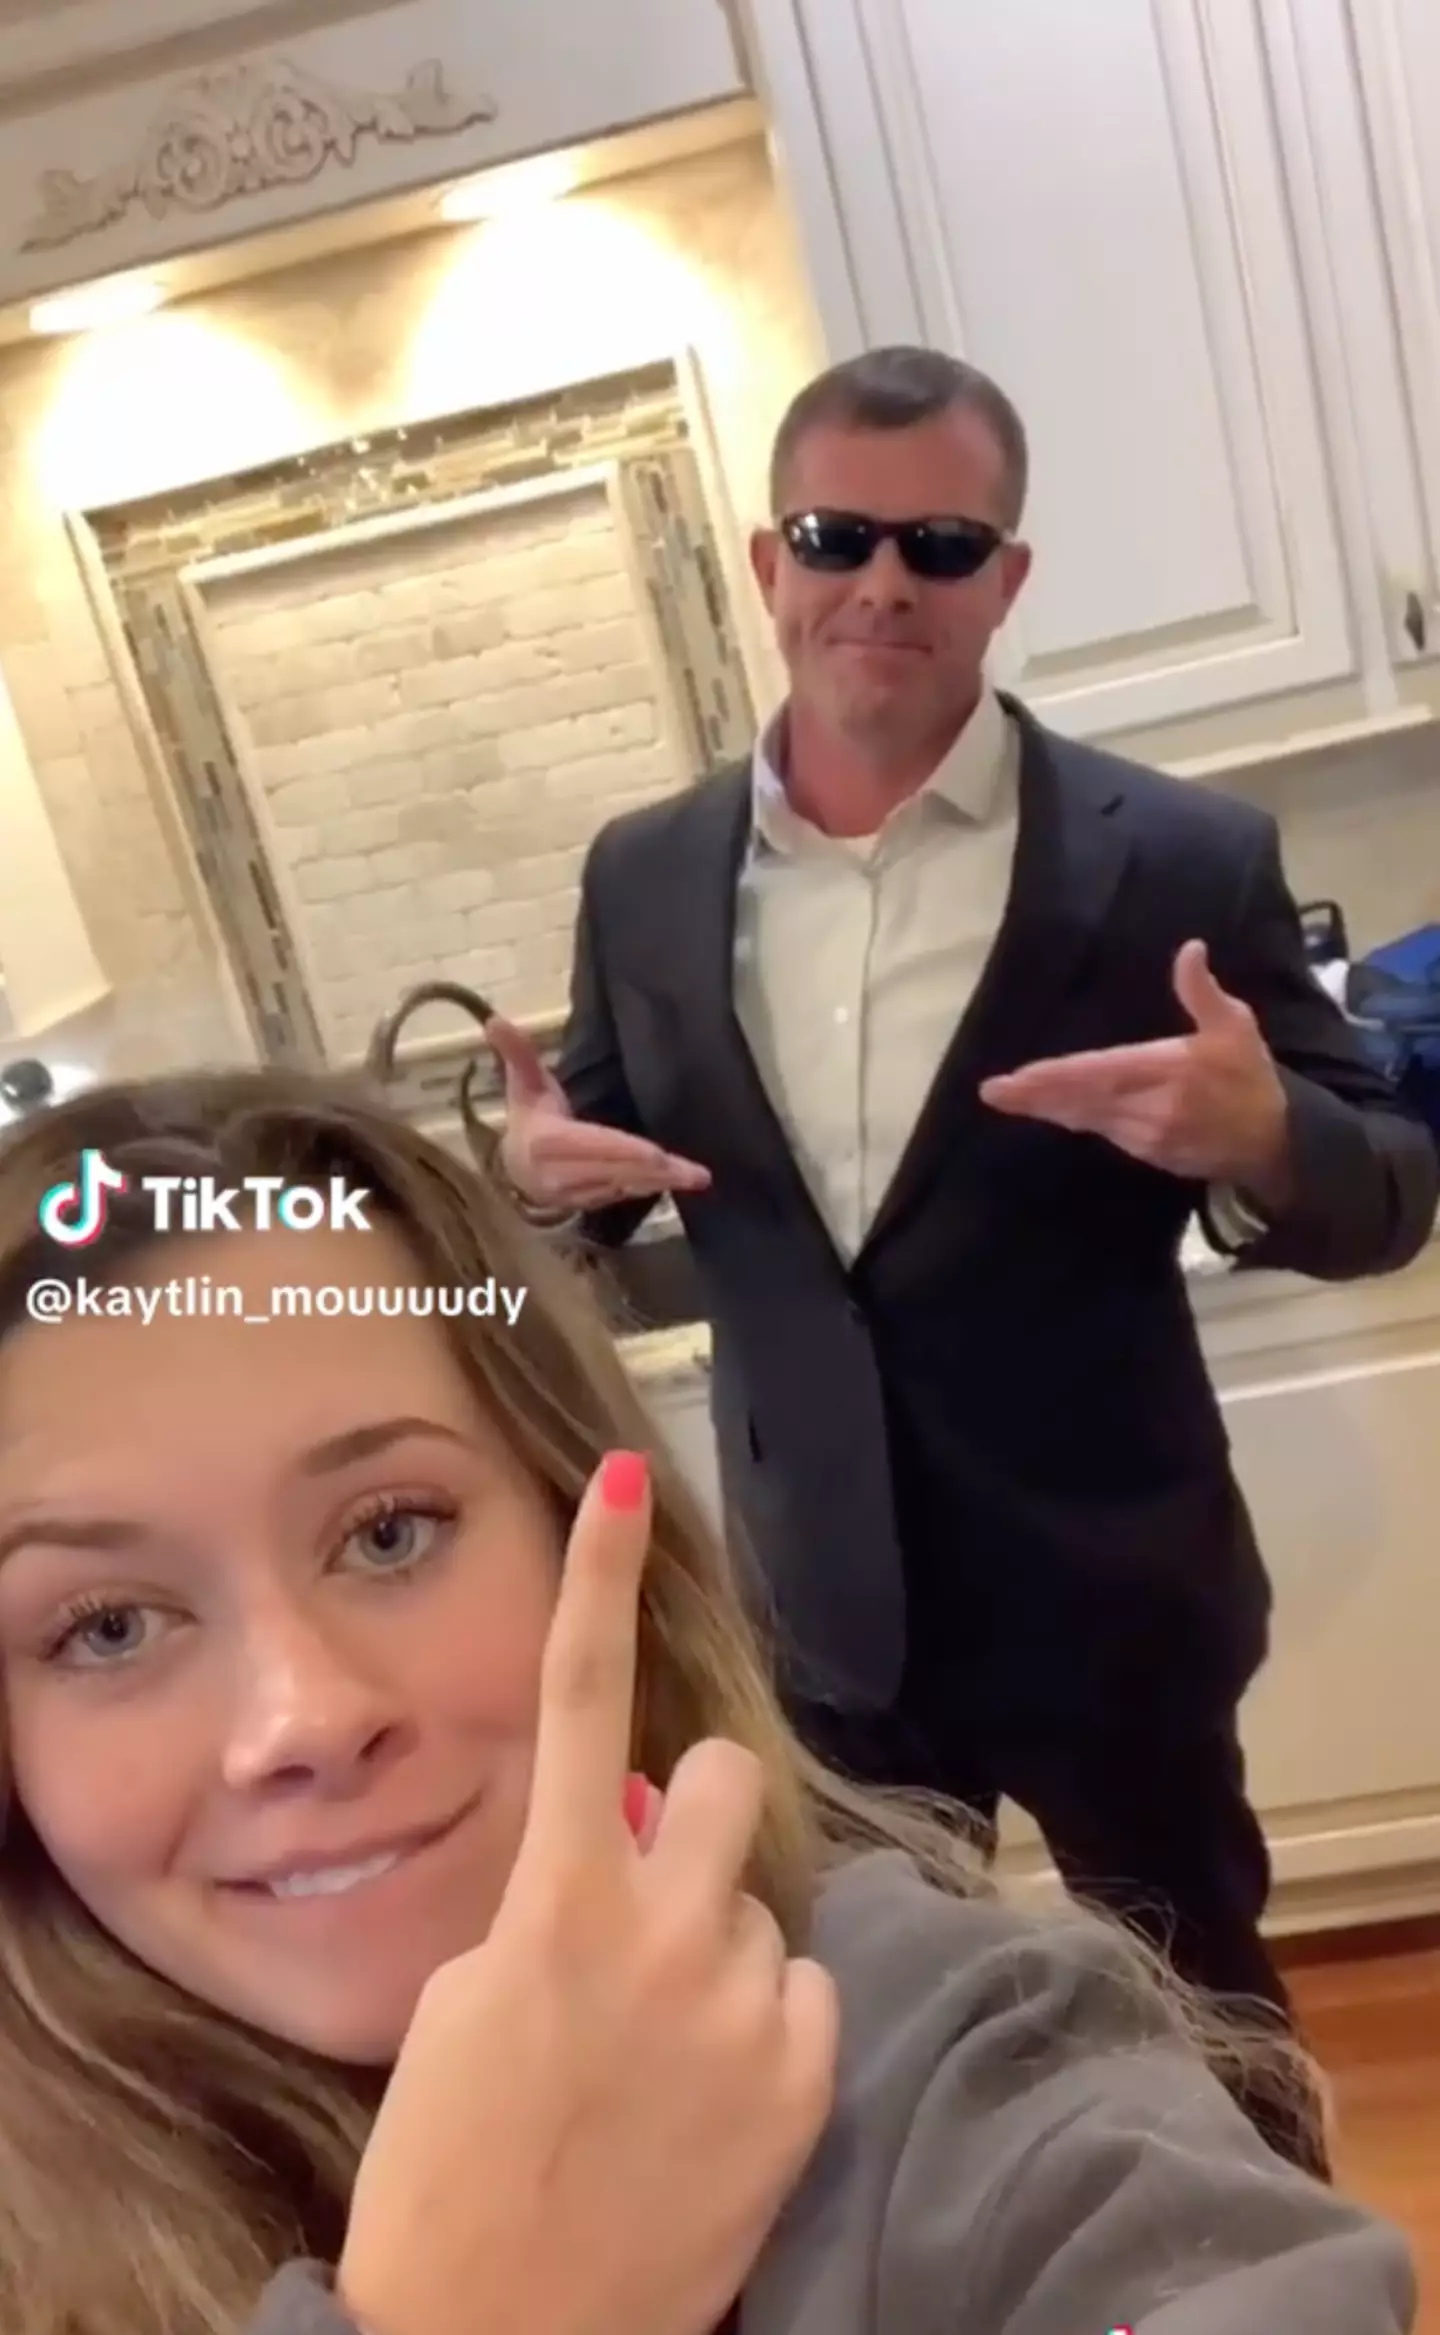 Bobby and his family regularly shared videos together on TikTok.